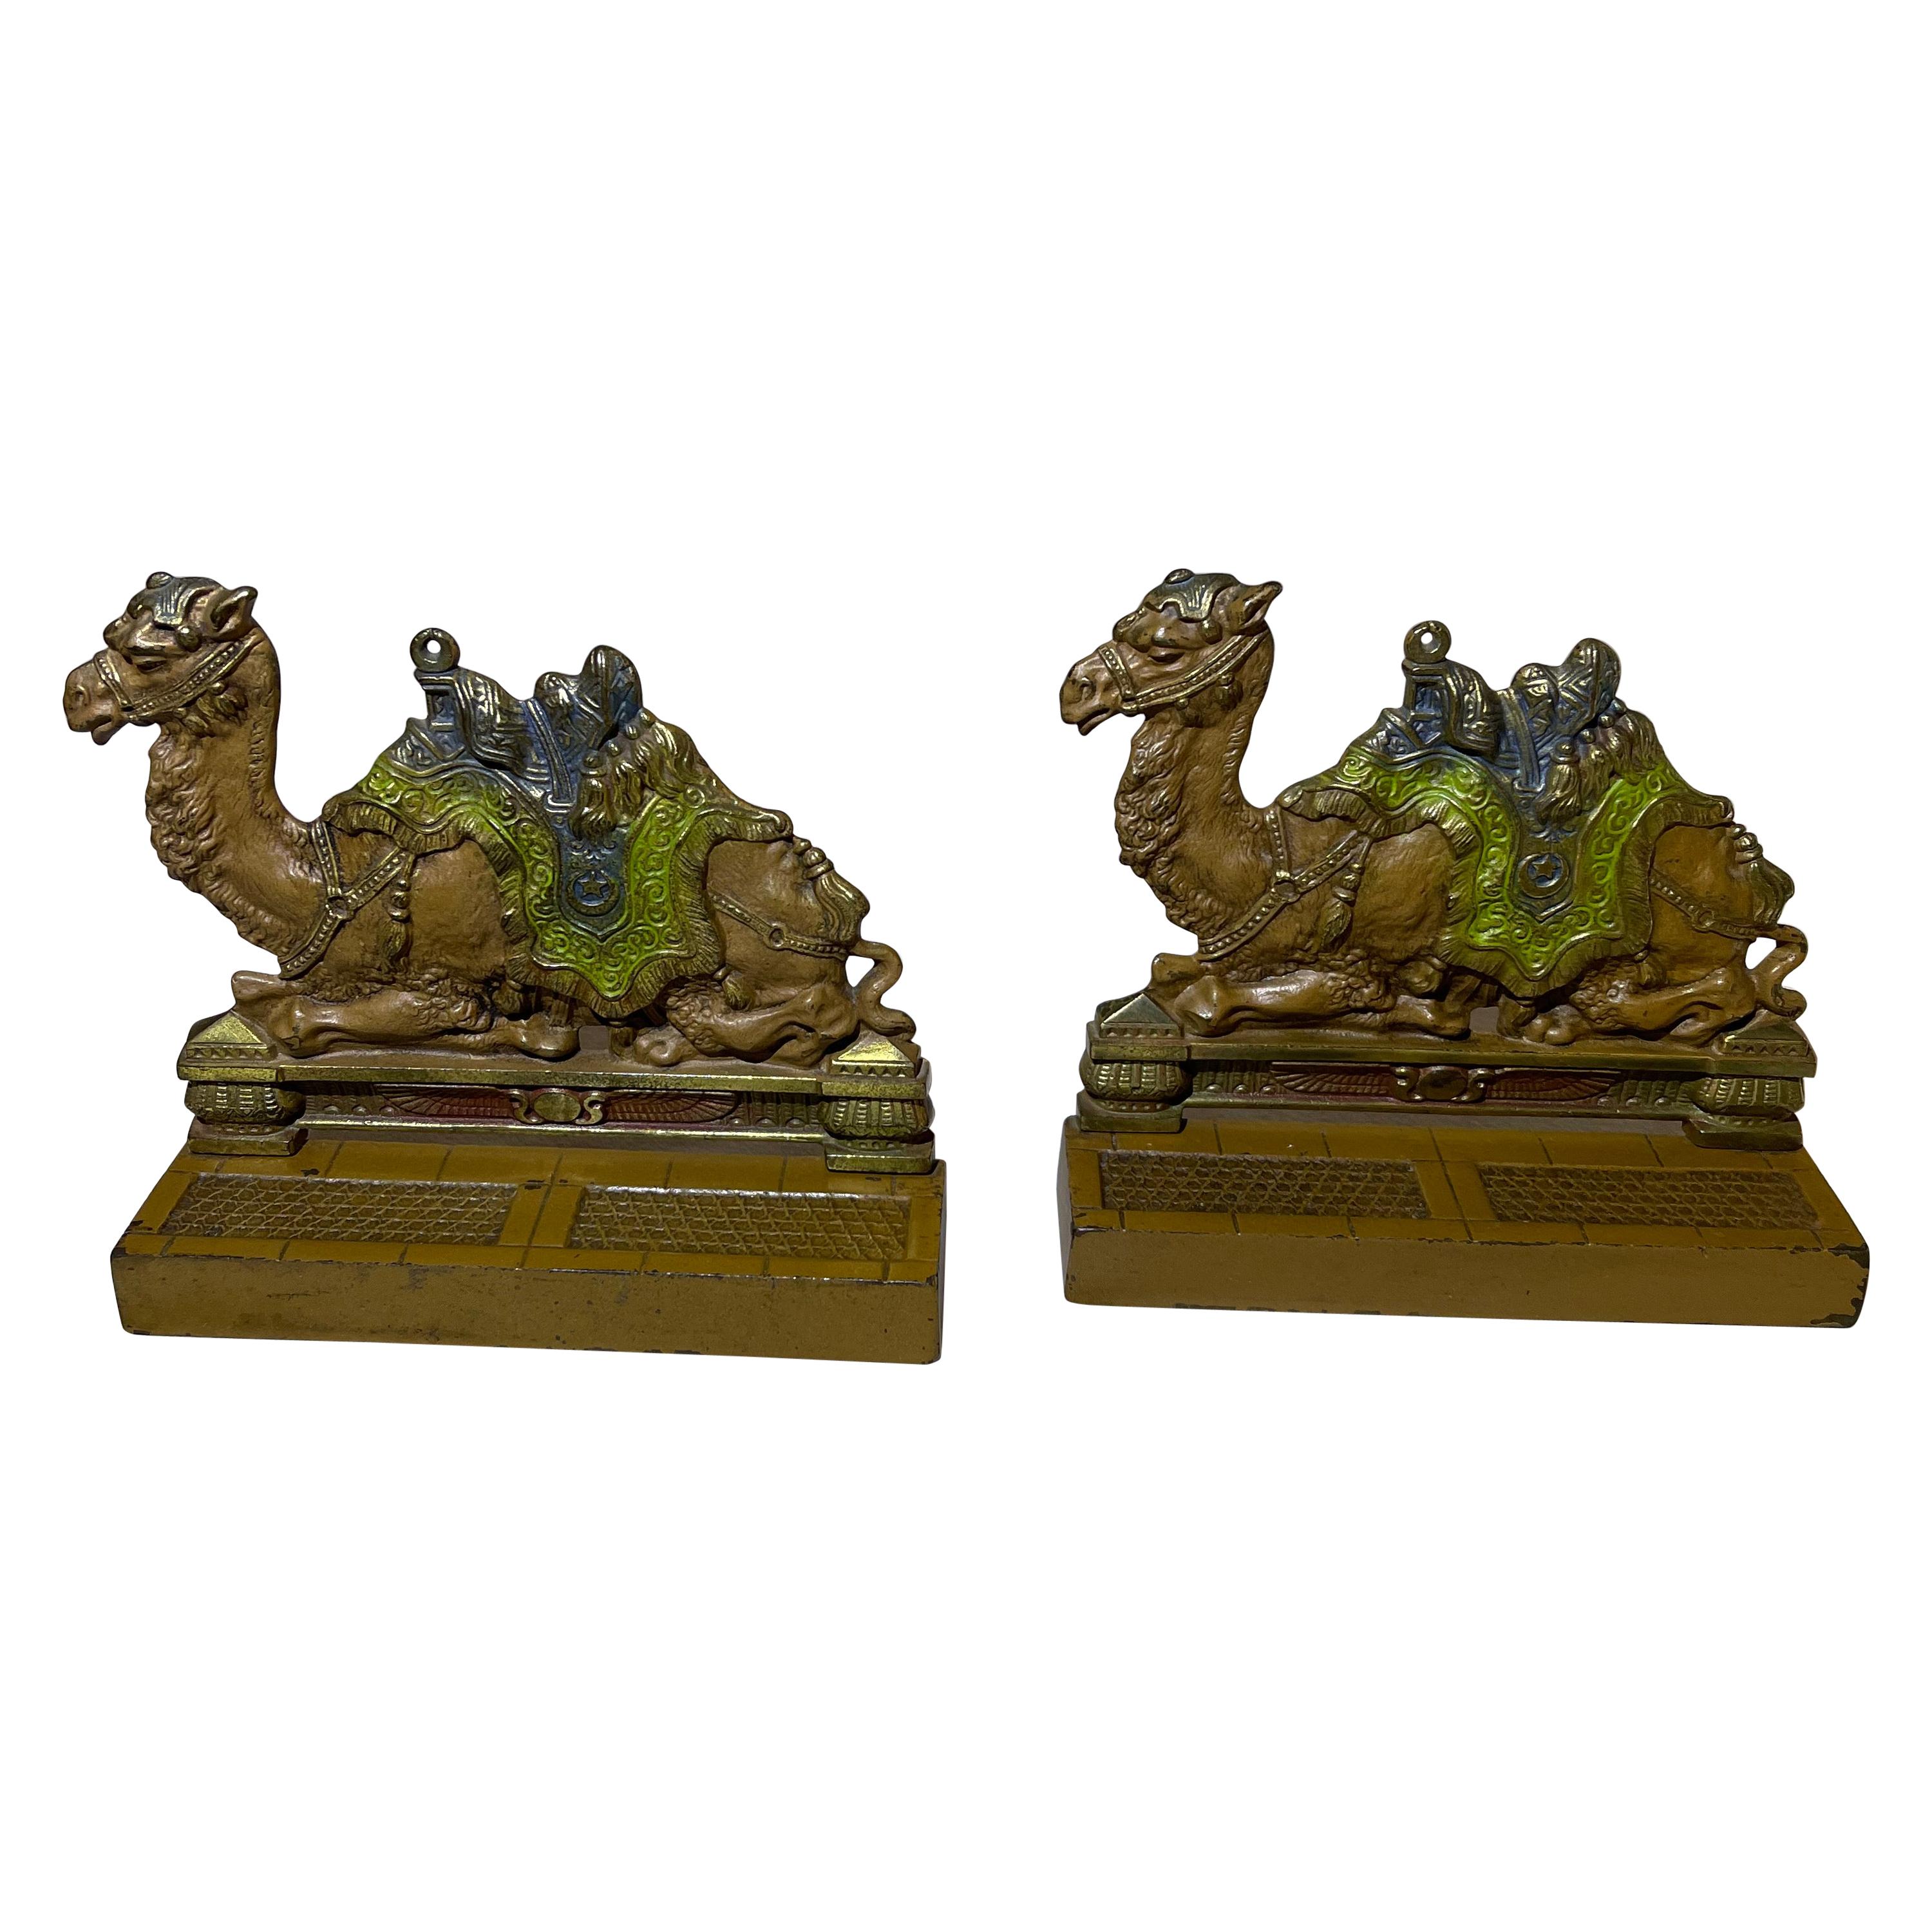 Antique Pair of Painted Cast Iron Camel Bookends by Judd Co, ca. 1910